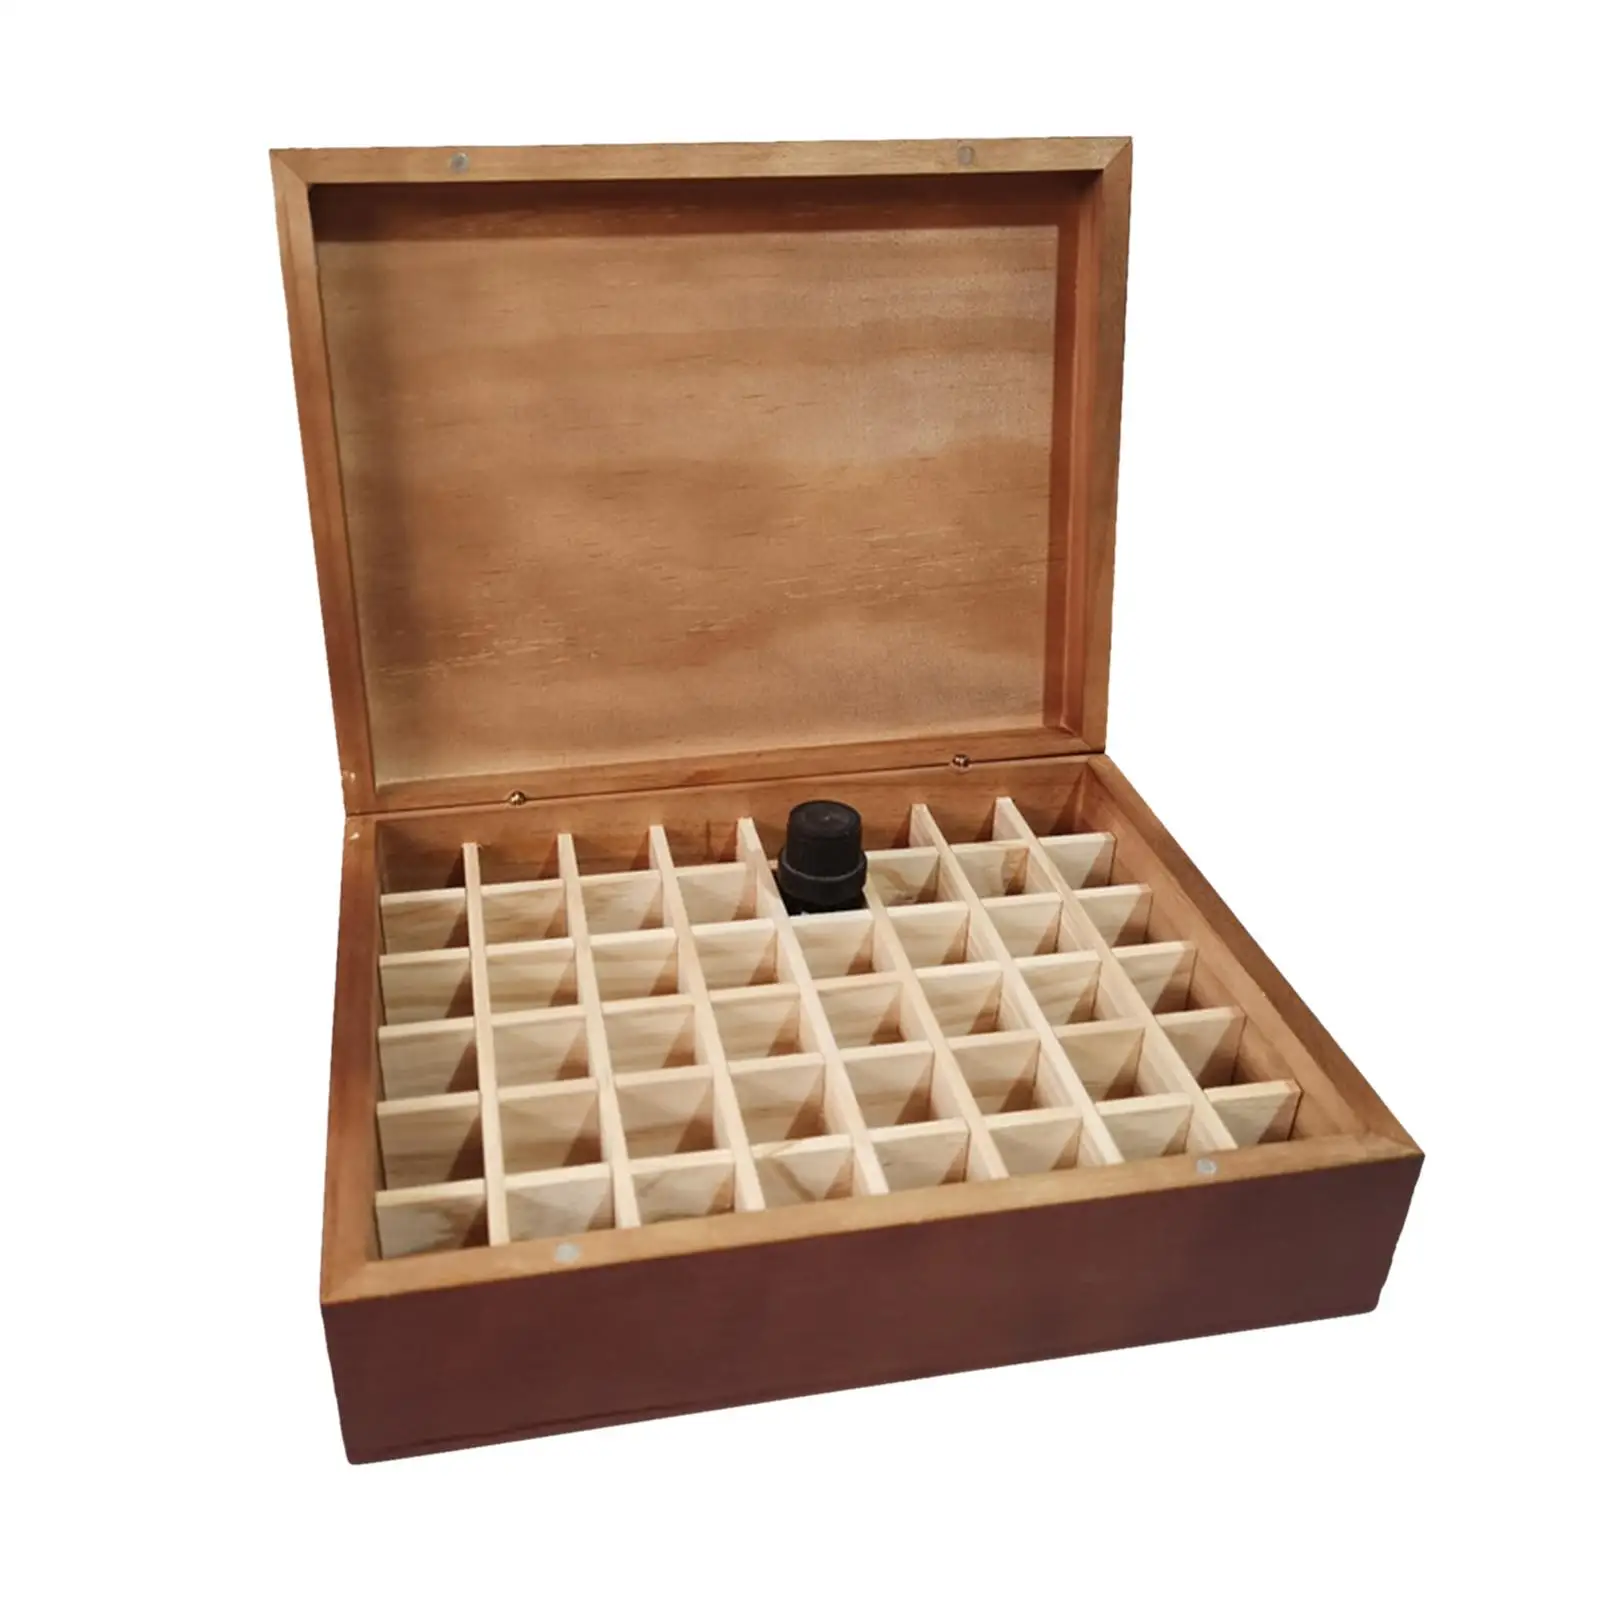  Oil Storage Box 48 Slots 5ml Showing Collection Container Wooden